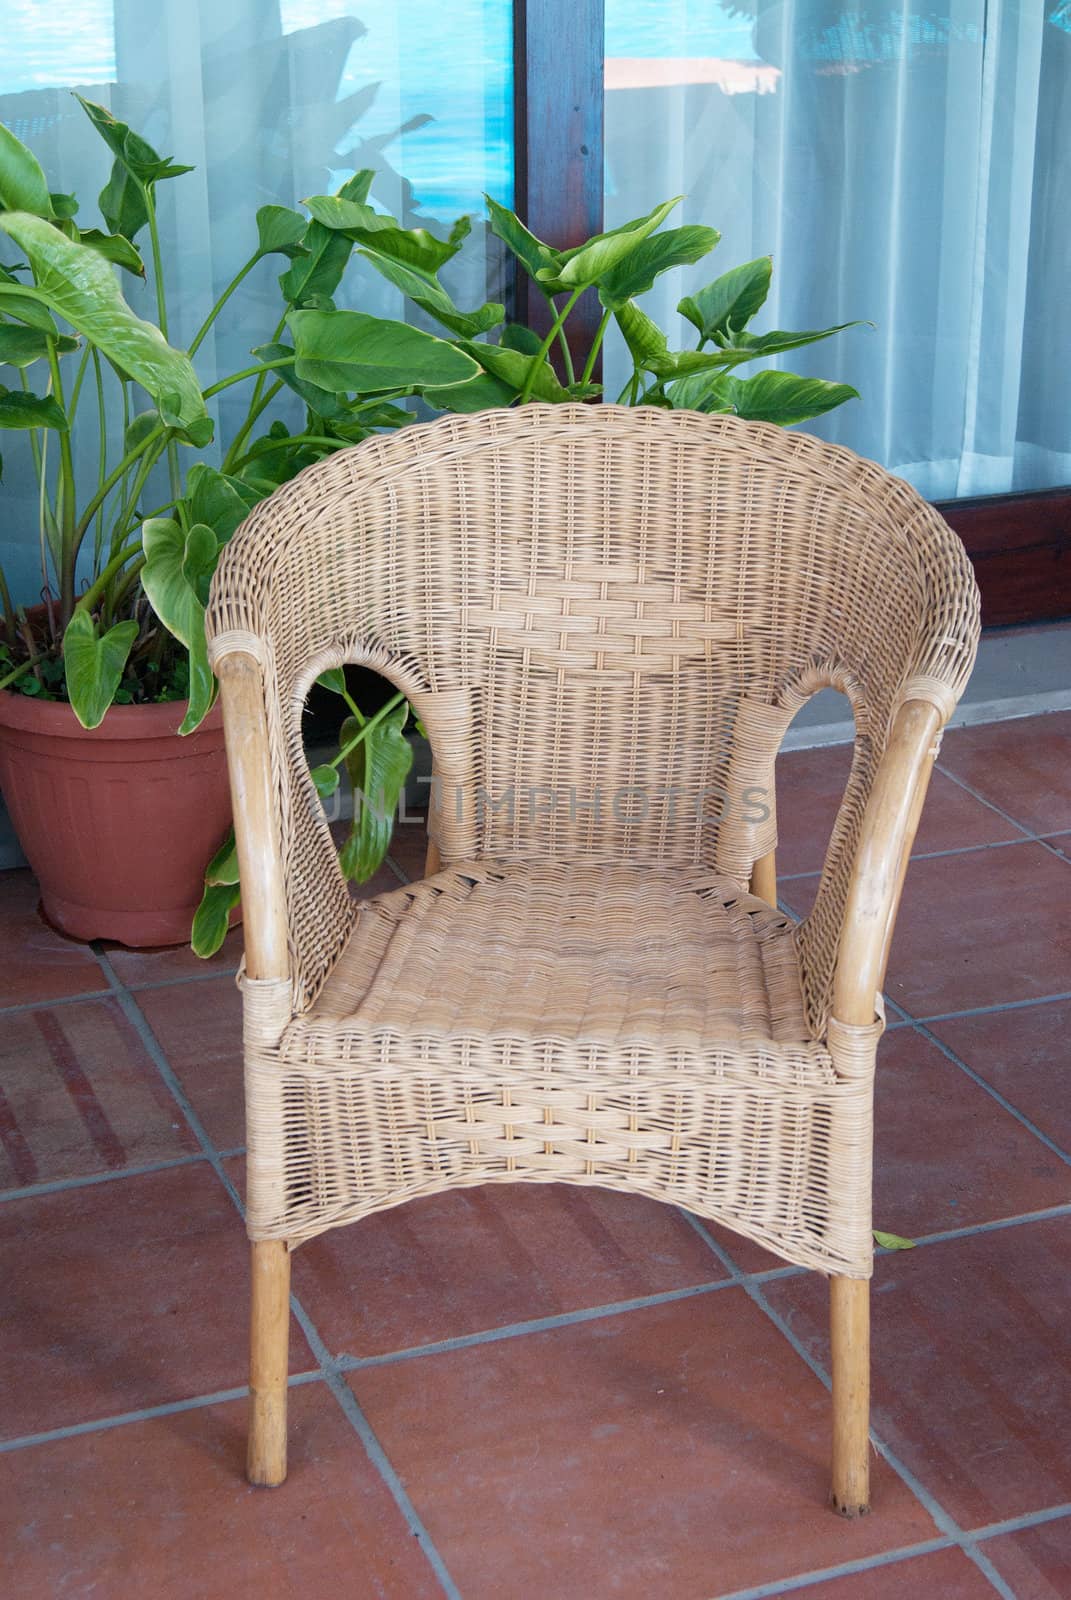 Wicker chair rattan brown by Larisa13